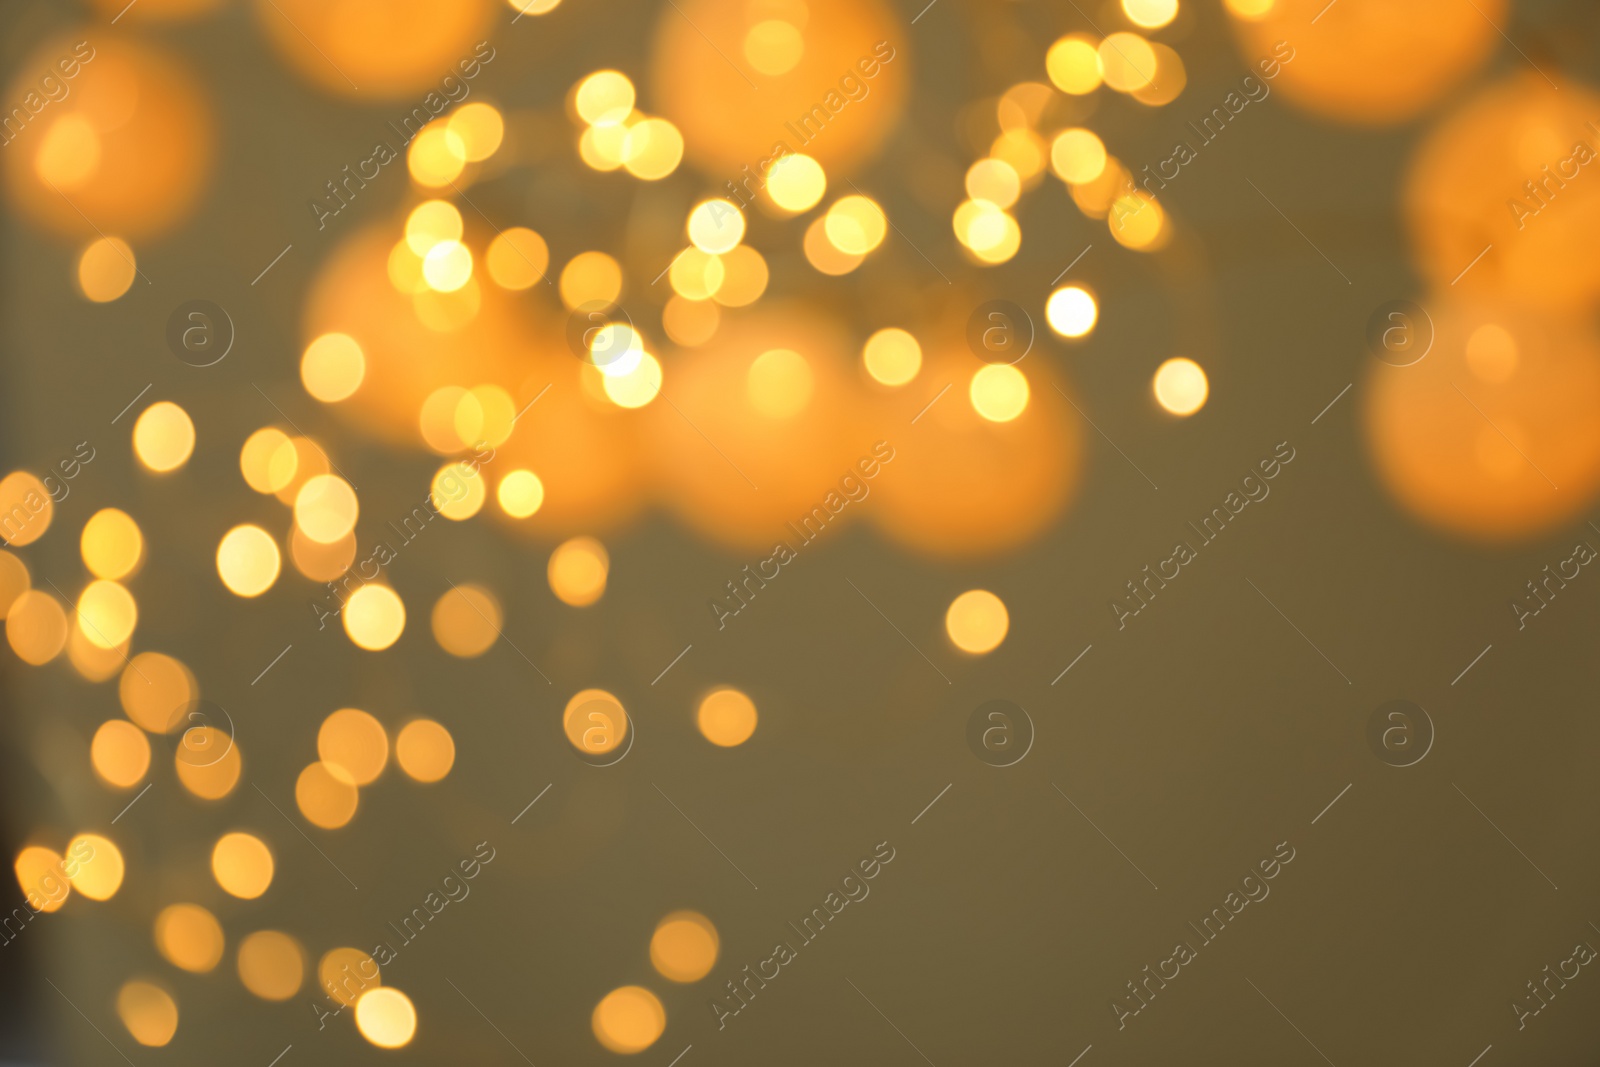 Photo of Blurred view of gold lights on dark background. Bokeh effect